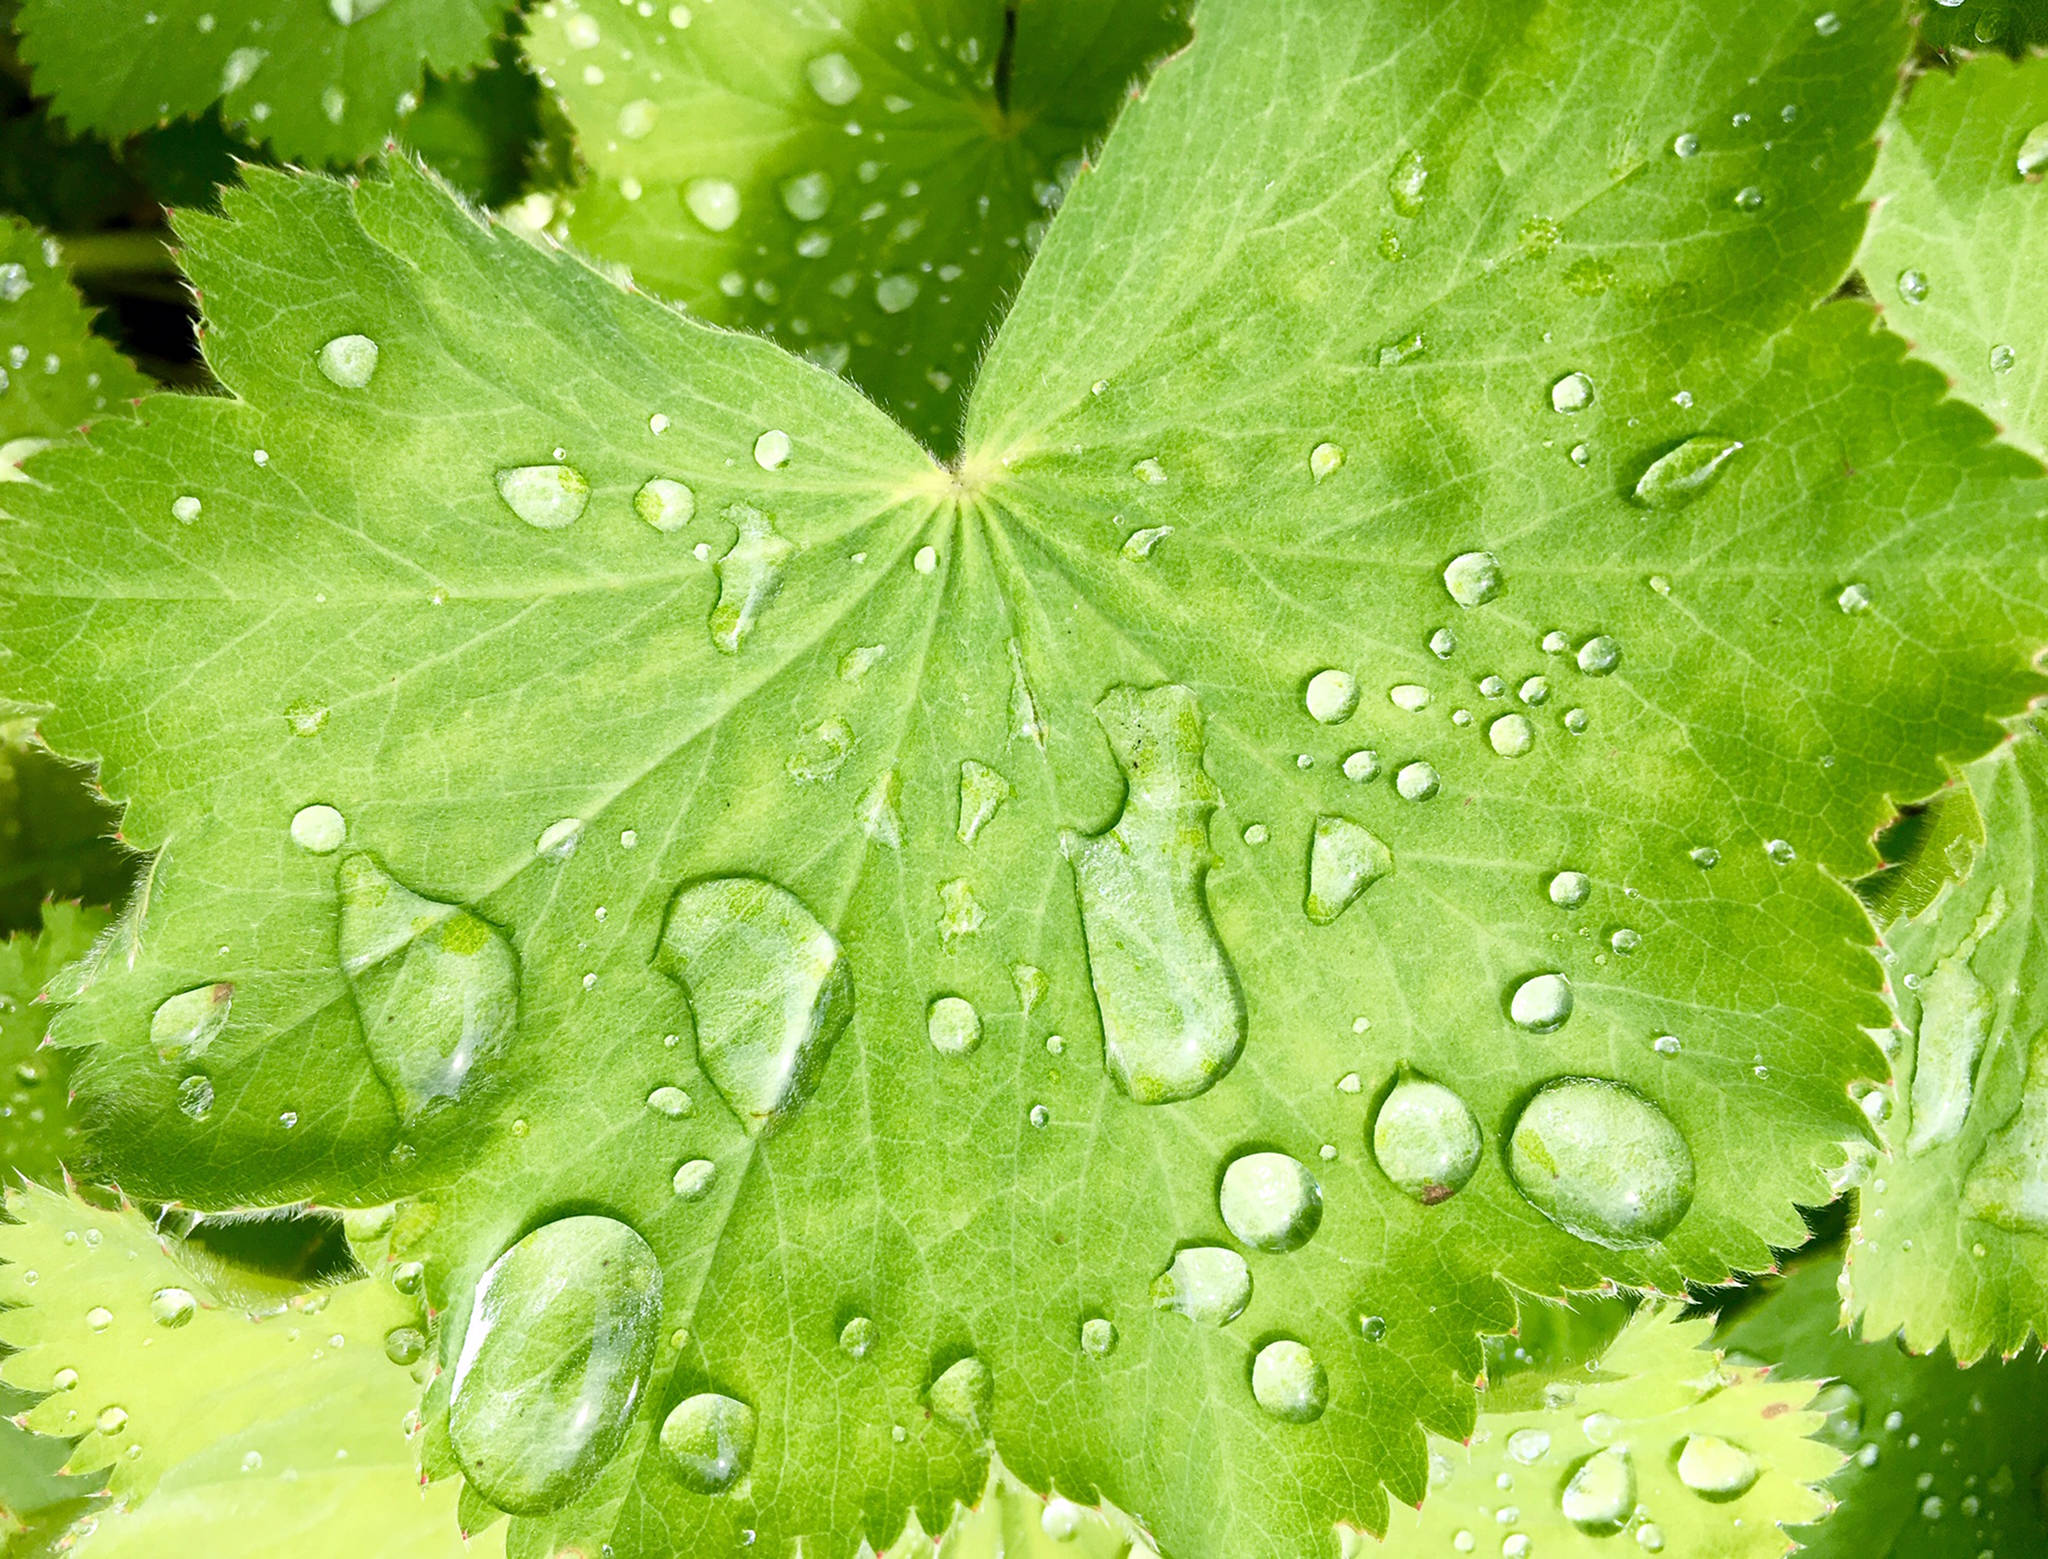 Lady’s Mantle collects raindrops by Mile 2 of Glacier Highway on June 19, 2019. (Courtesy Photo | Denise Carroll)